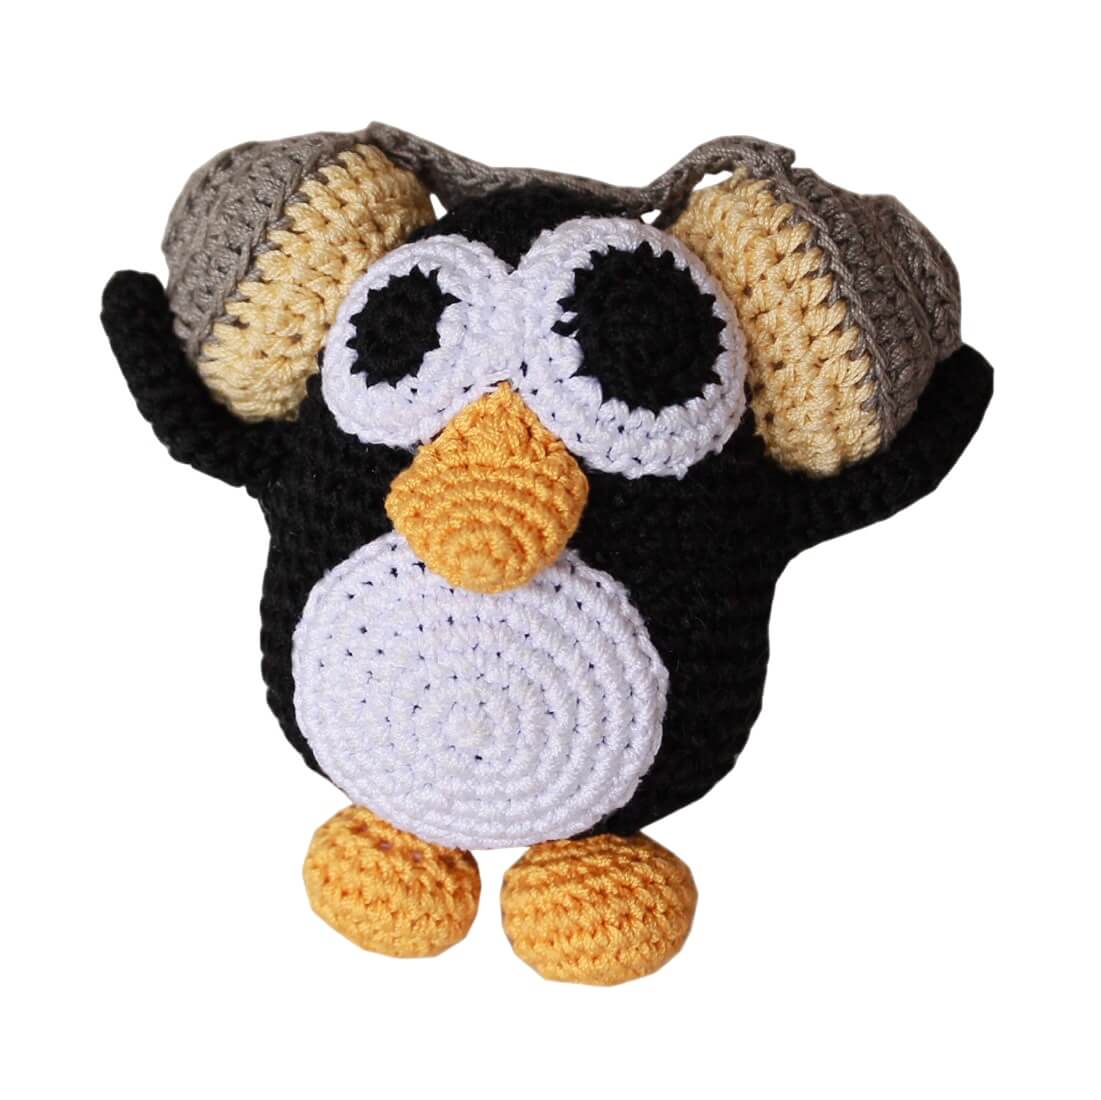 Knit Knacks "Hipster Penguin" handmade organic cotton dog toy. Black and white penguin with a yellow beak and feet, listening to music on big headphones.